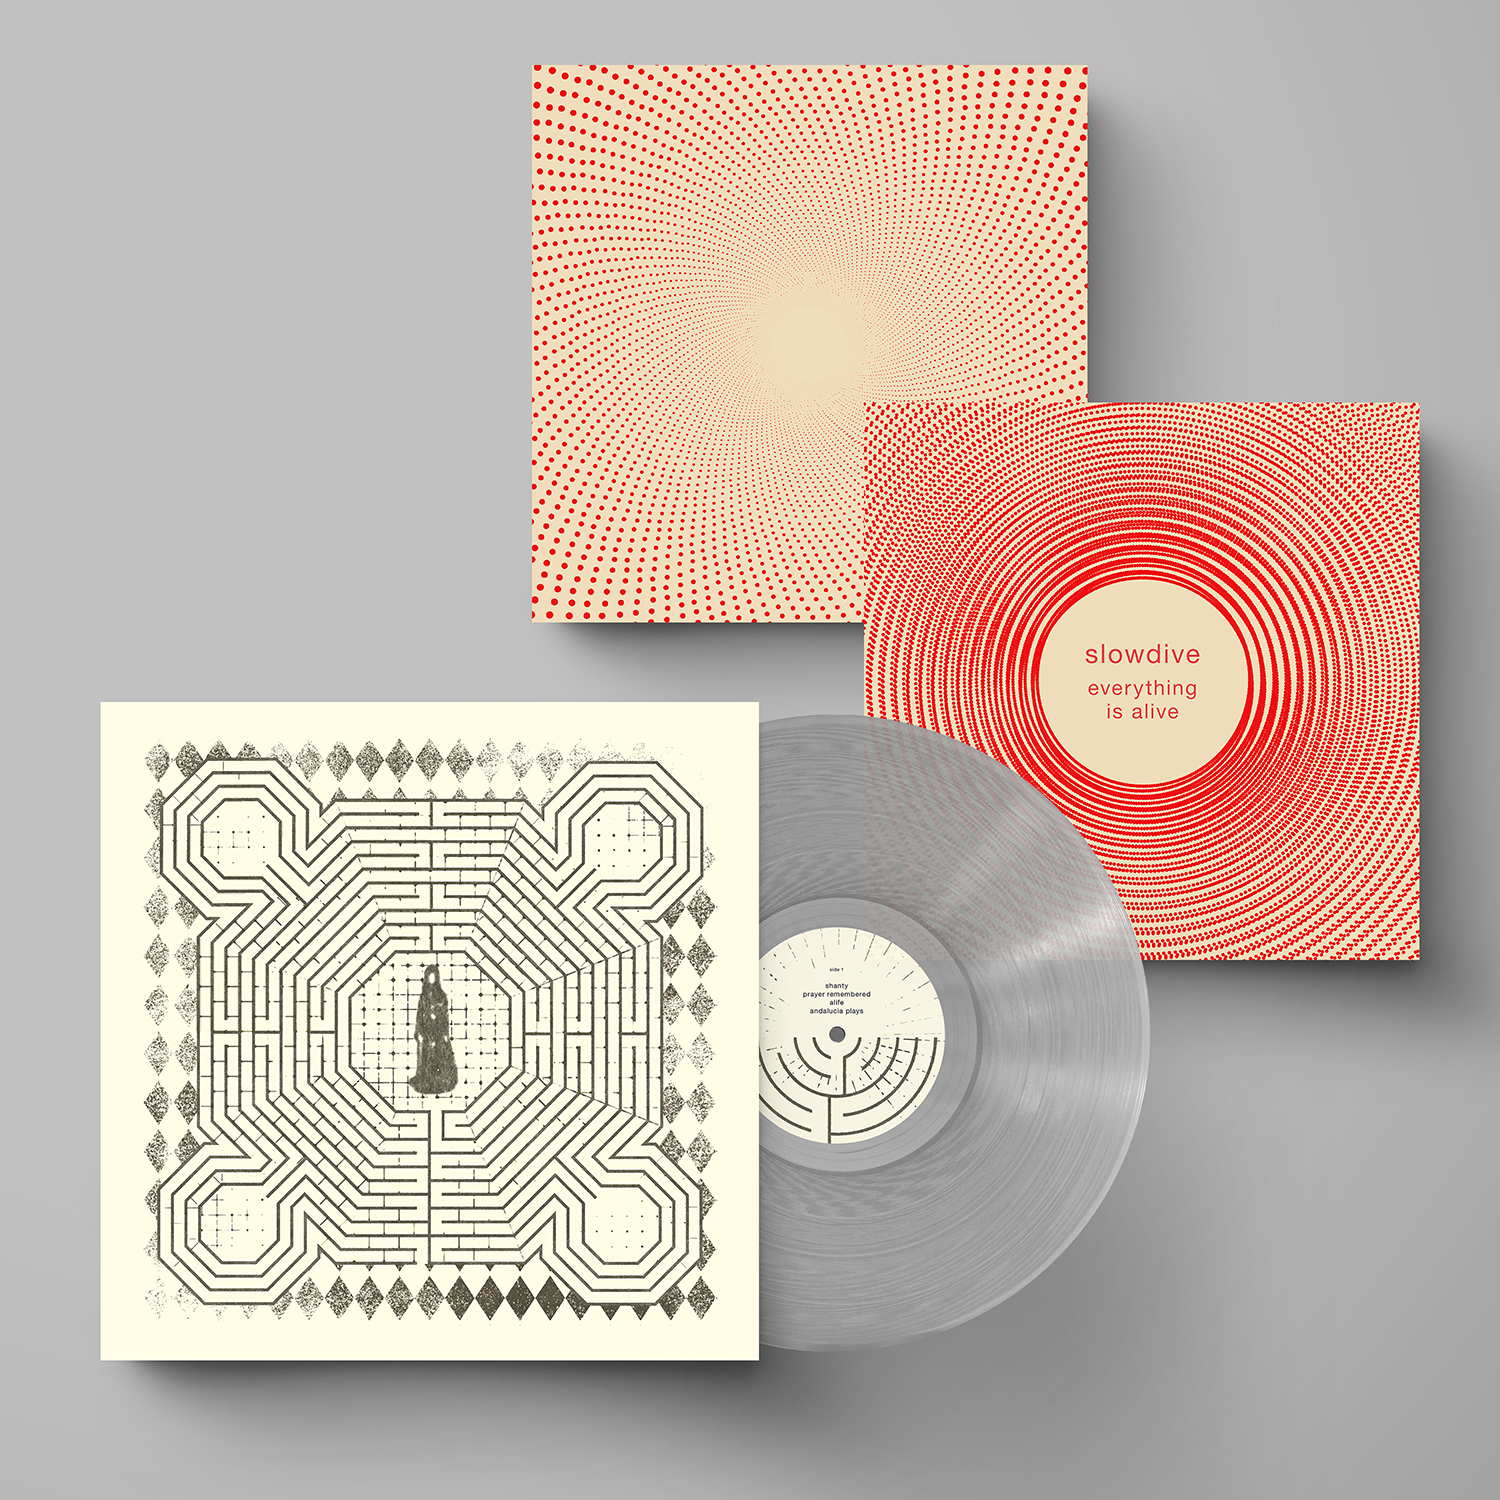 everything is alive: Limited Translucent Clear Vinyl LP + Exclusive Print